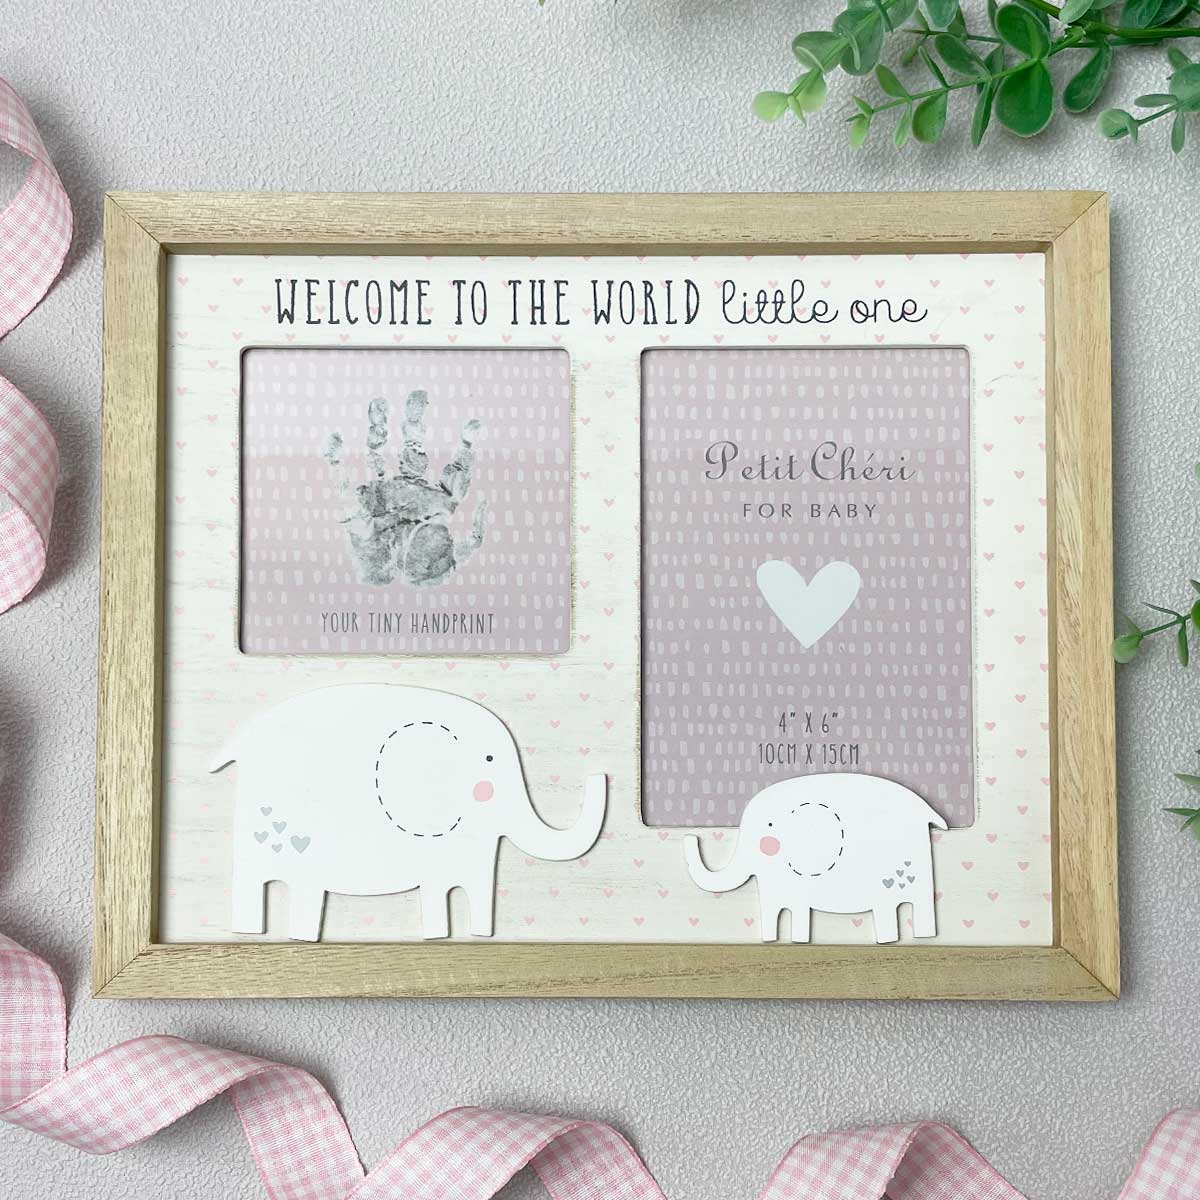 Welcome to the World Little One Hand Print and Photo Frame in Pink